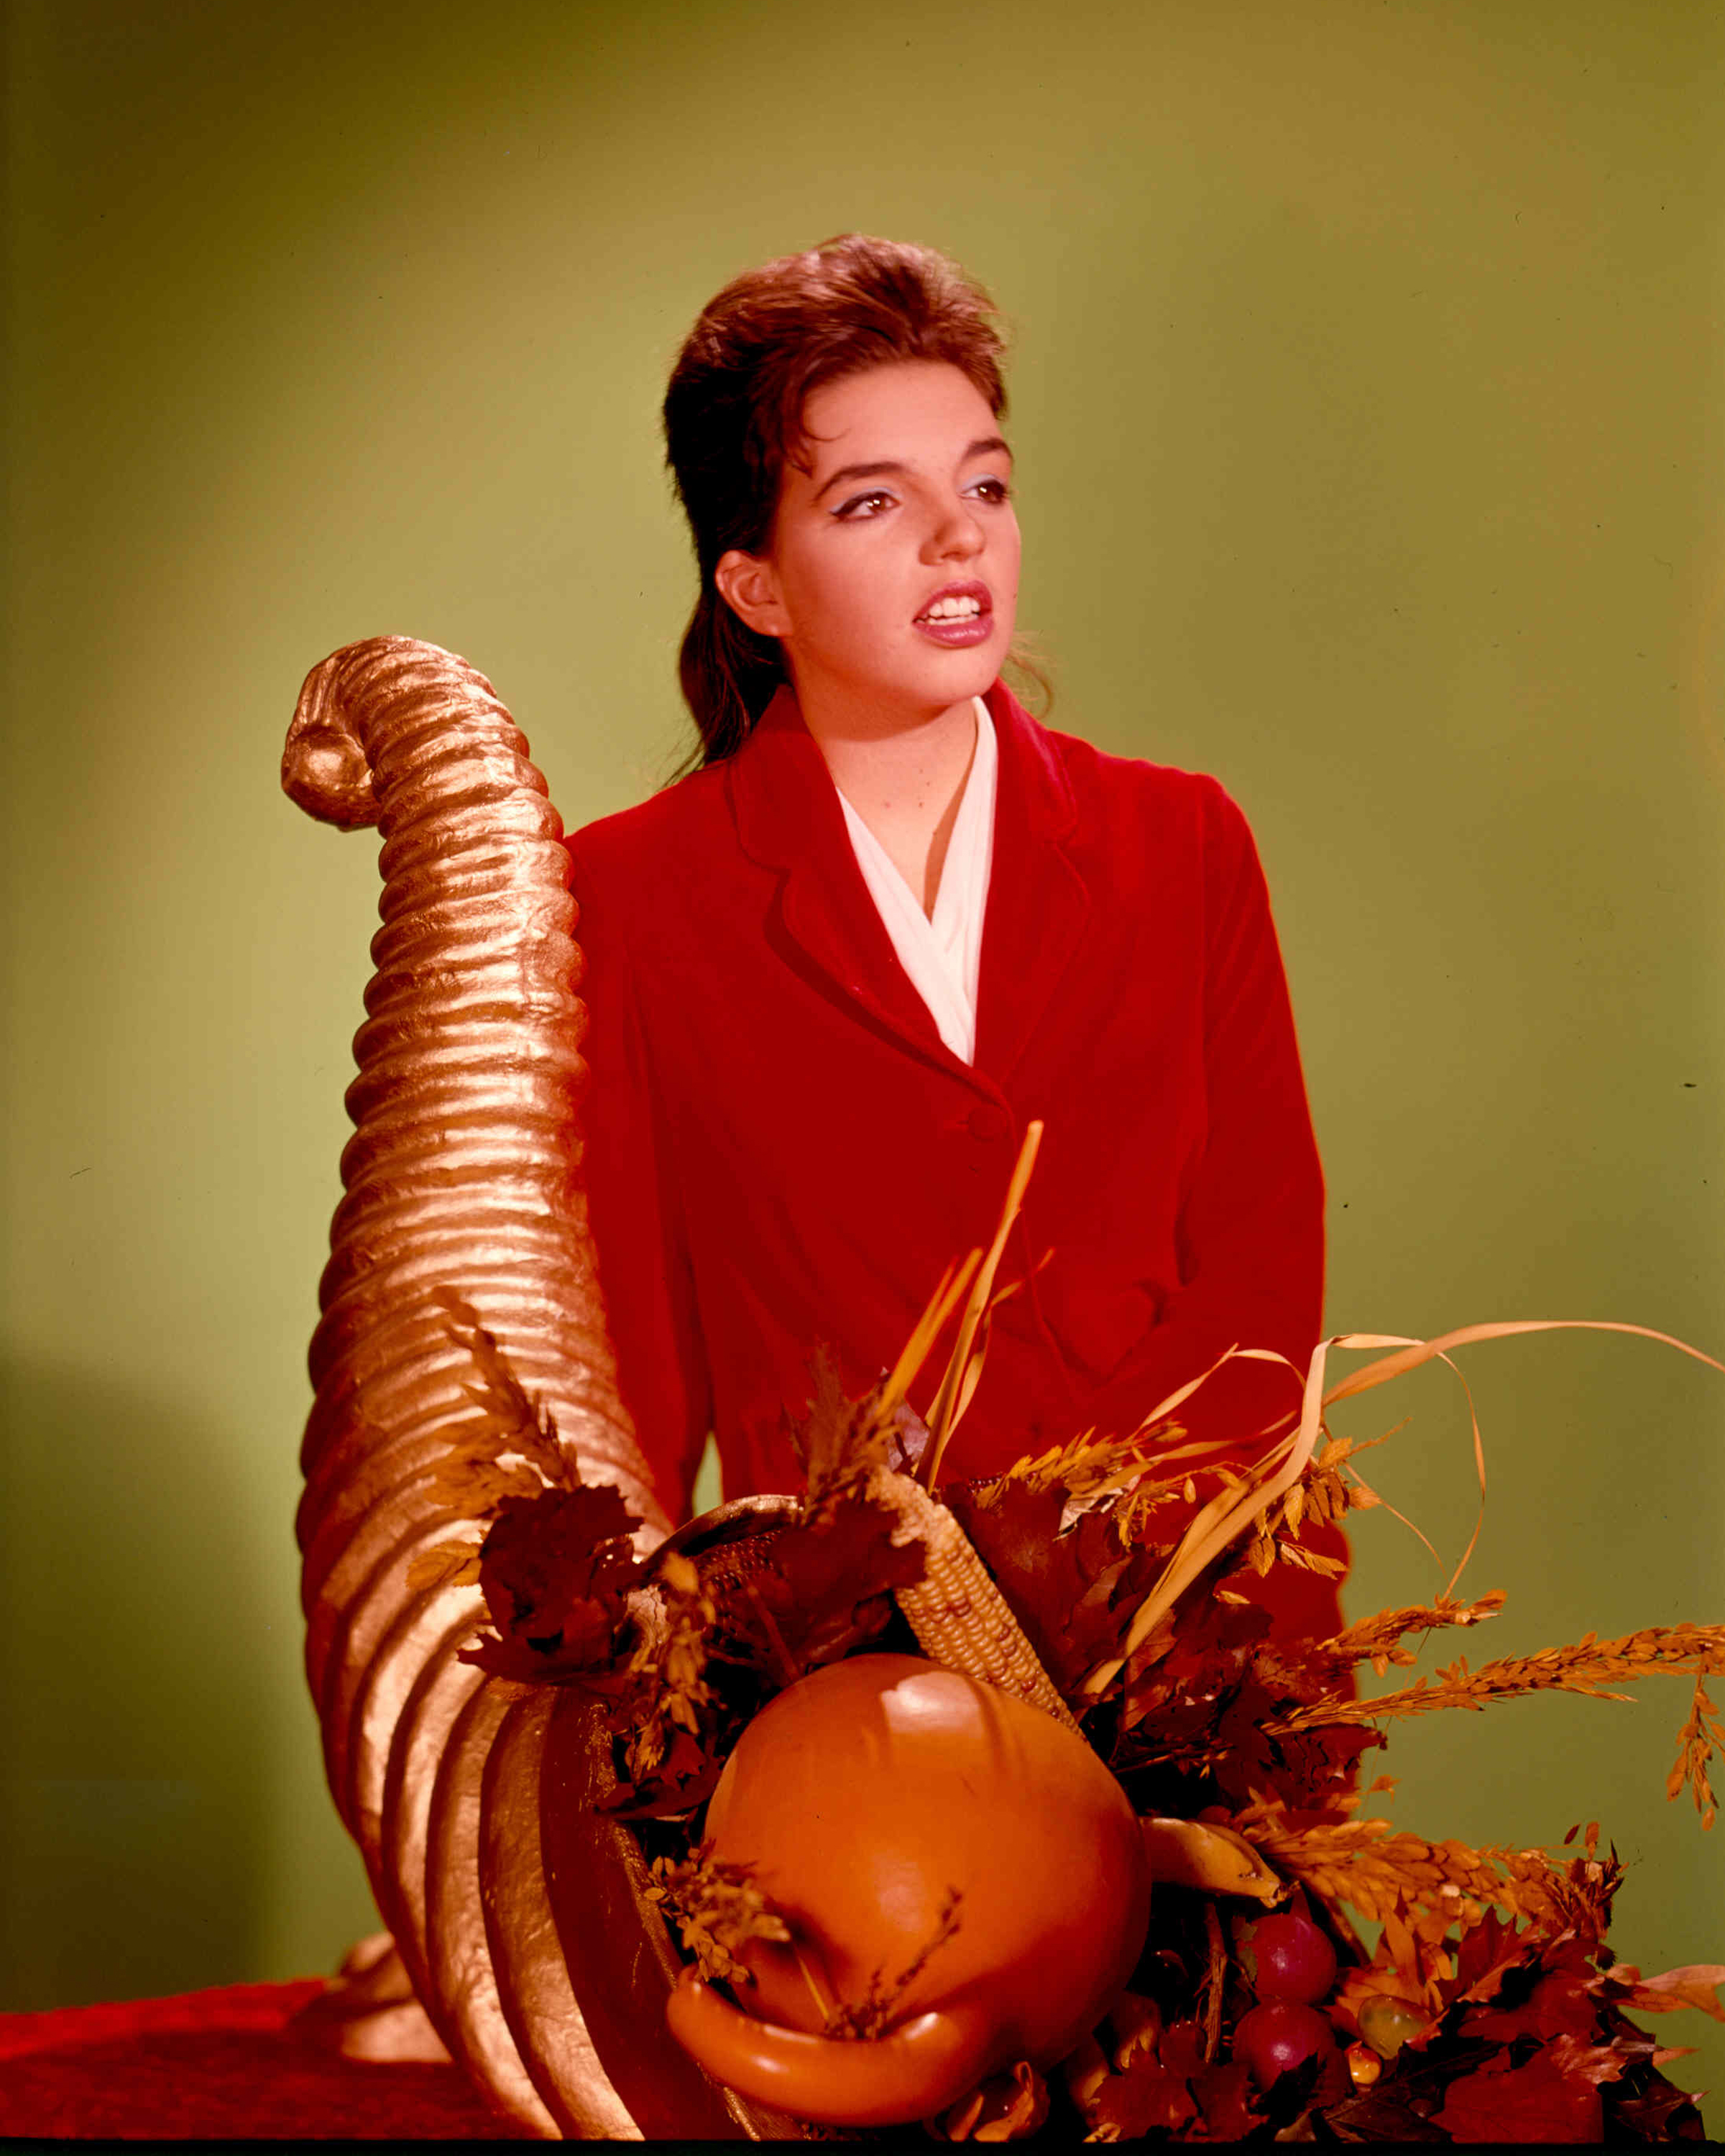 Liza Minnelli poses in a red jacket beside an autumnal table setting in a studio portrait from 1965. | Source: Getty Images